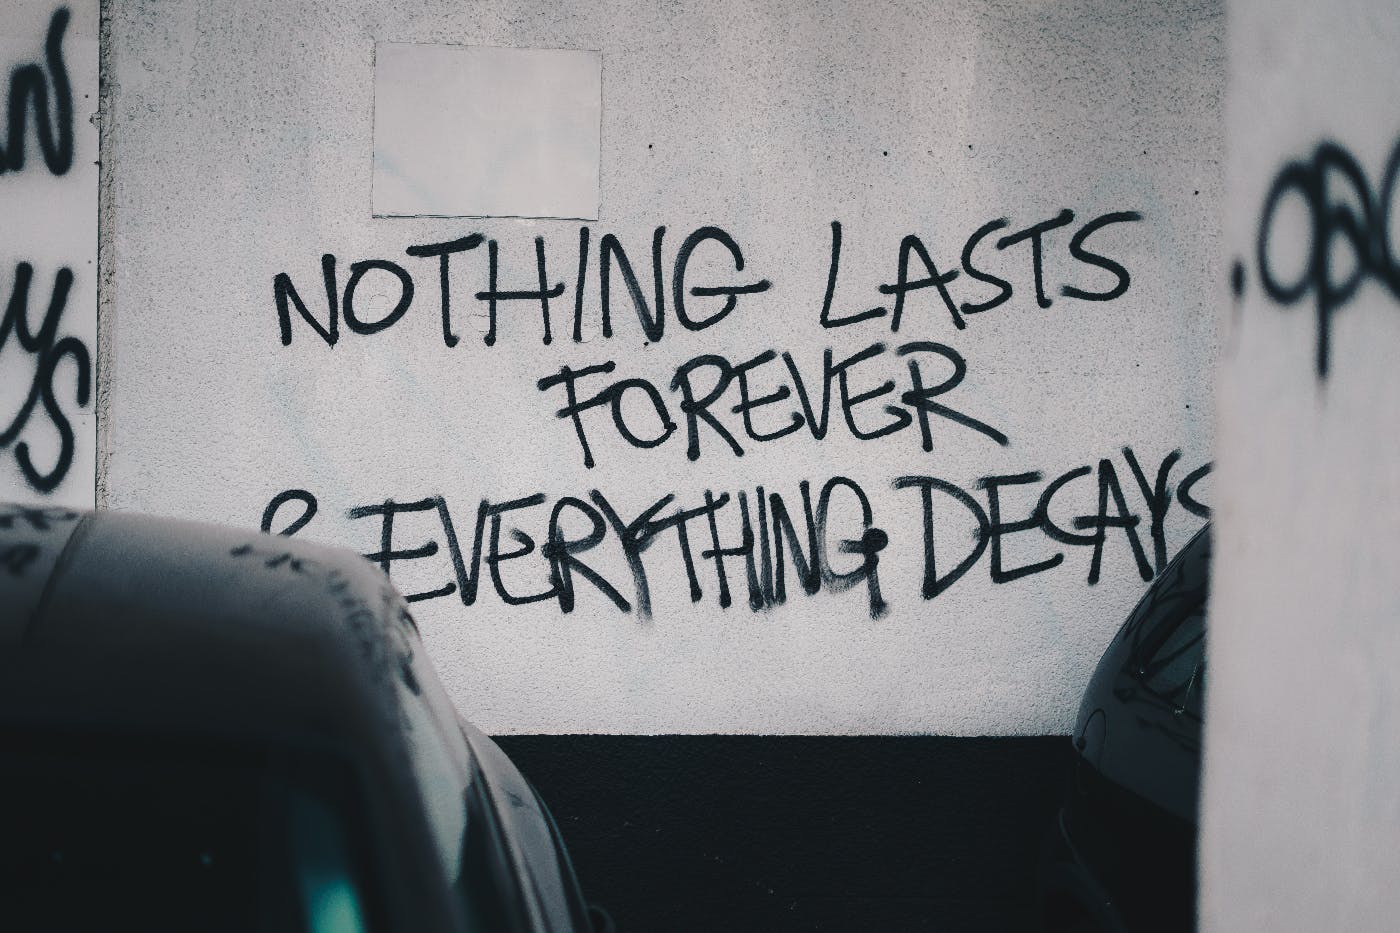 A wall spray painted with Nothing Lasts Forever Everything Decays